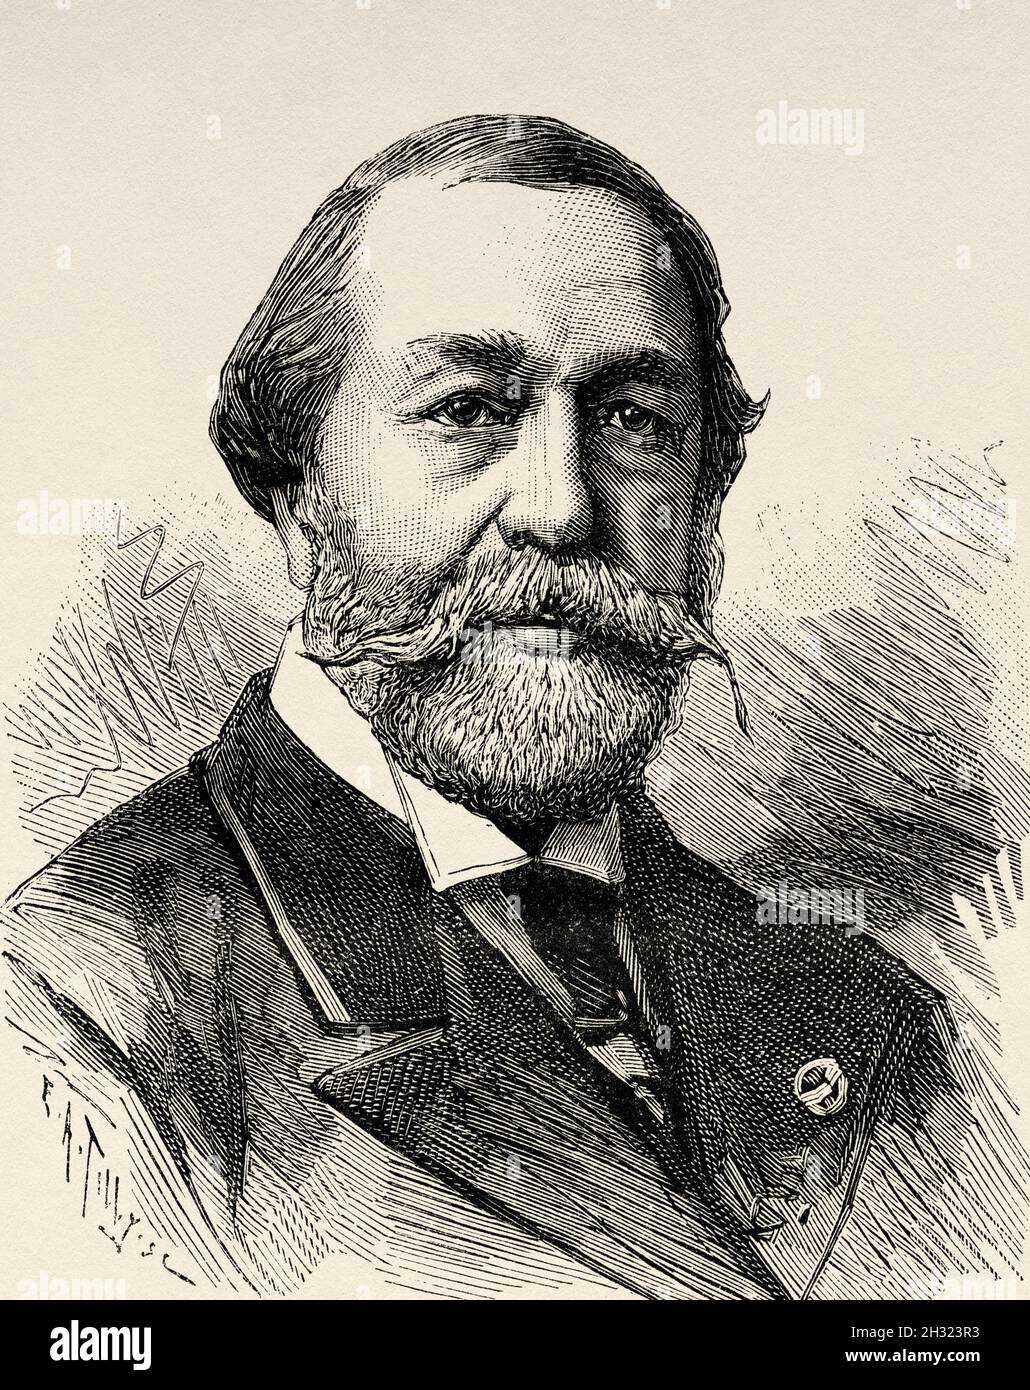 Théodose Achille Louis Vicomte du Moncel. Théodore du Moncel (1821-1884) was a prominent French physicist and advocate of the use of electricity. In 1879 he founded the journal La lumière électrique. Old 19th century engraved illustration from La Nature 1883 Stock Photo